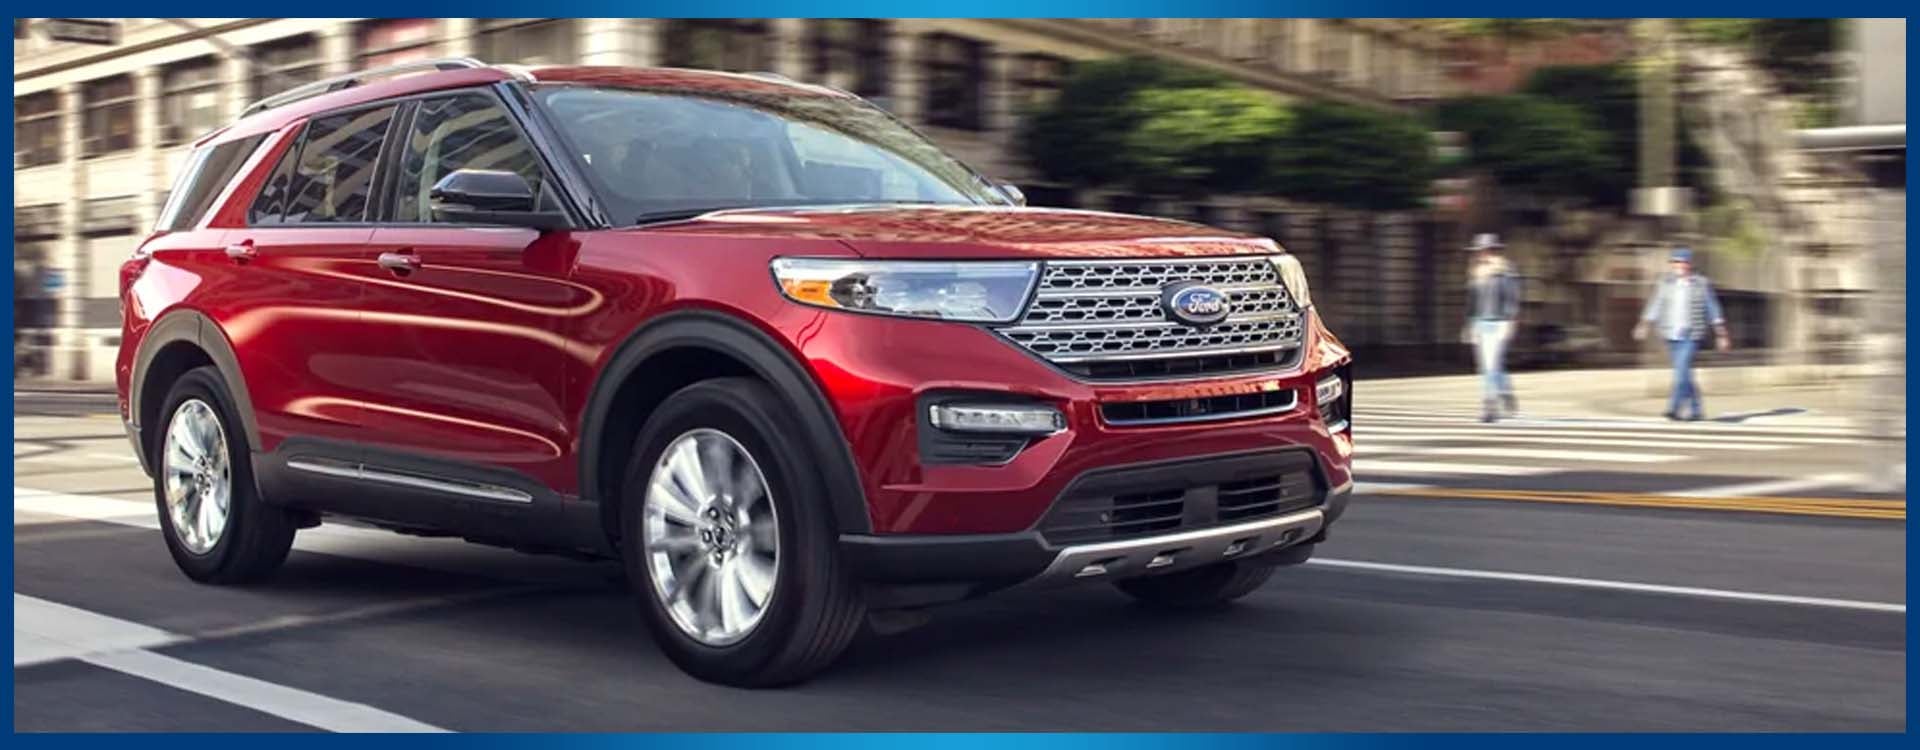 2021 Ford Explorer | Towing Capacity, Configurations & Specs